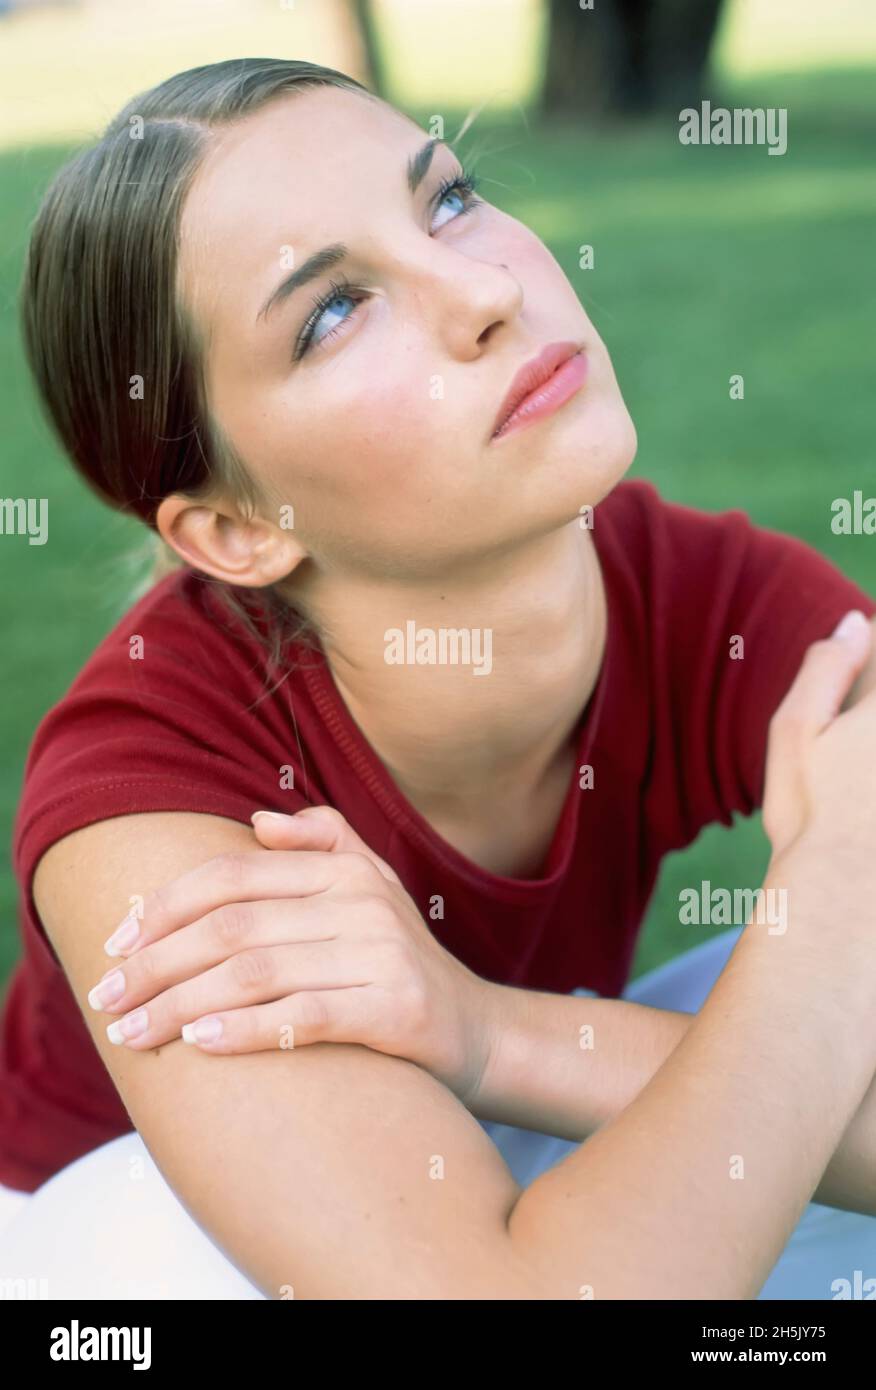 Teenage girl sitting outside looking up with a pensive expression; Germany Stock Photo